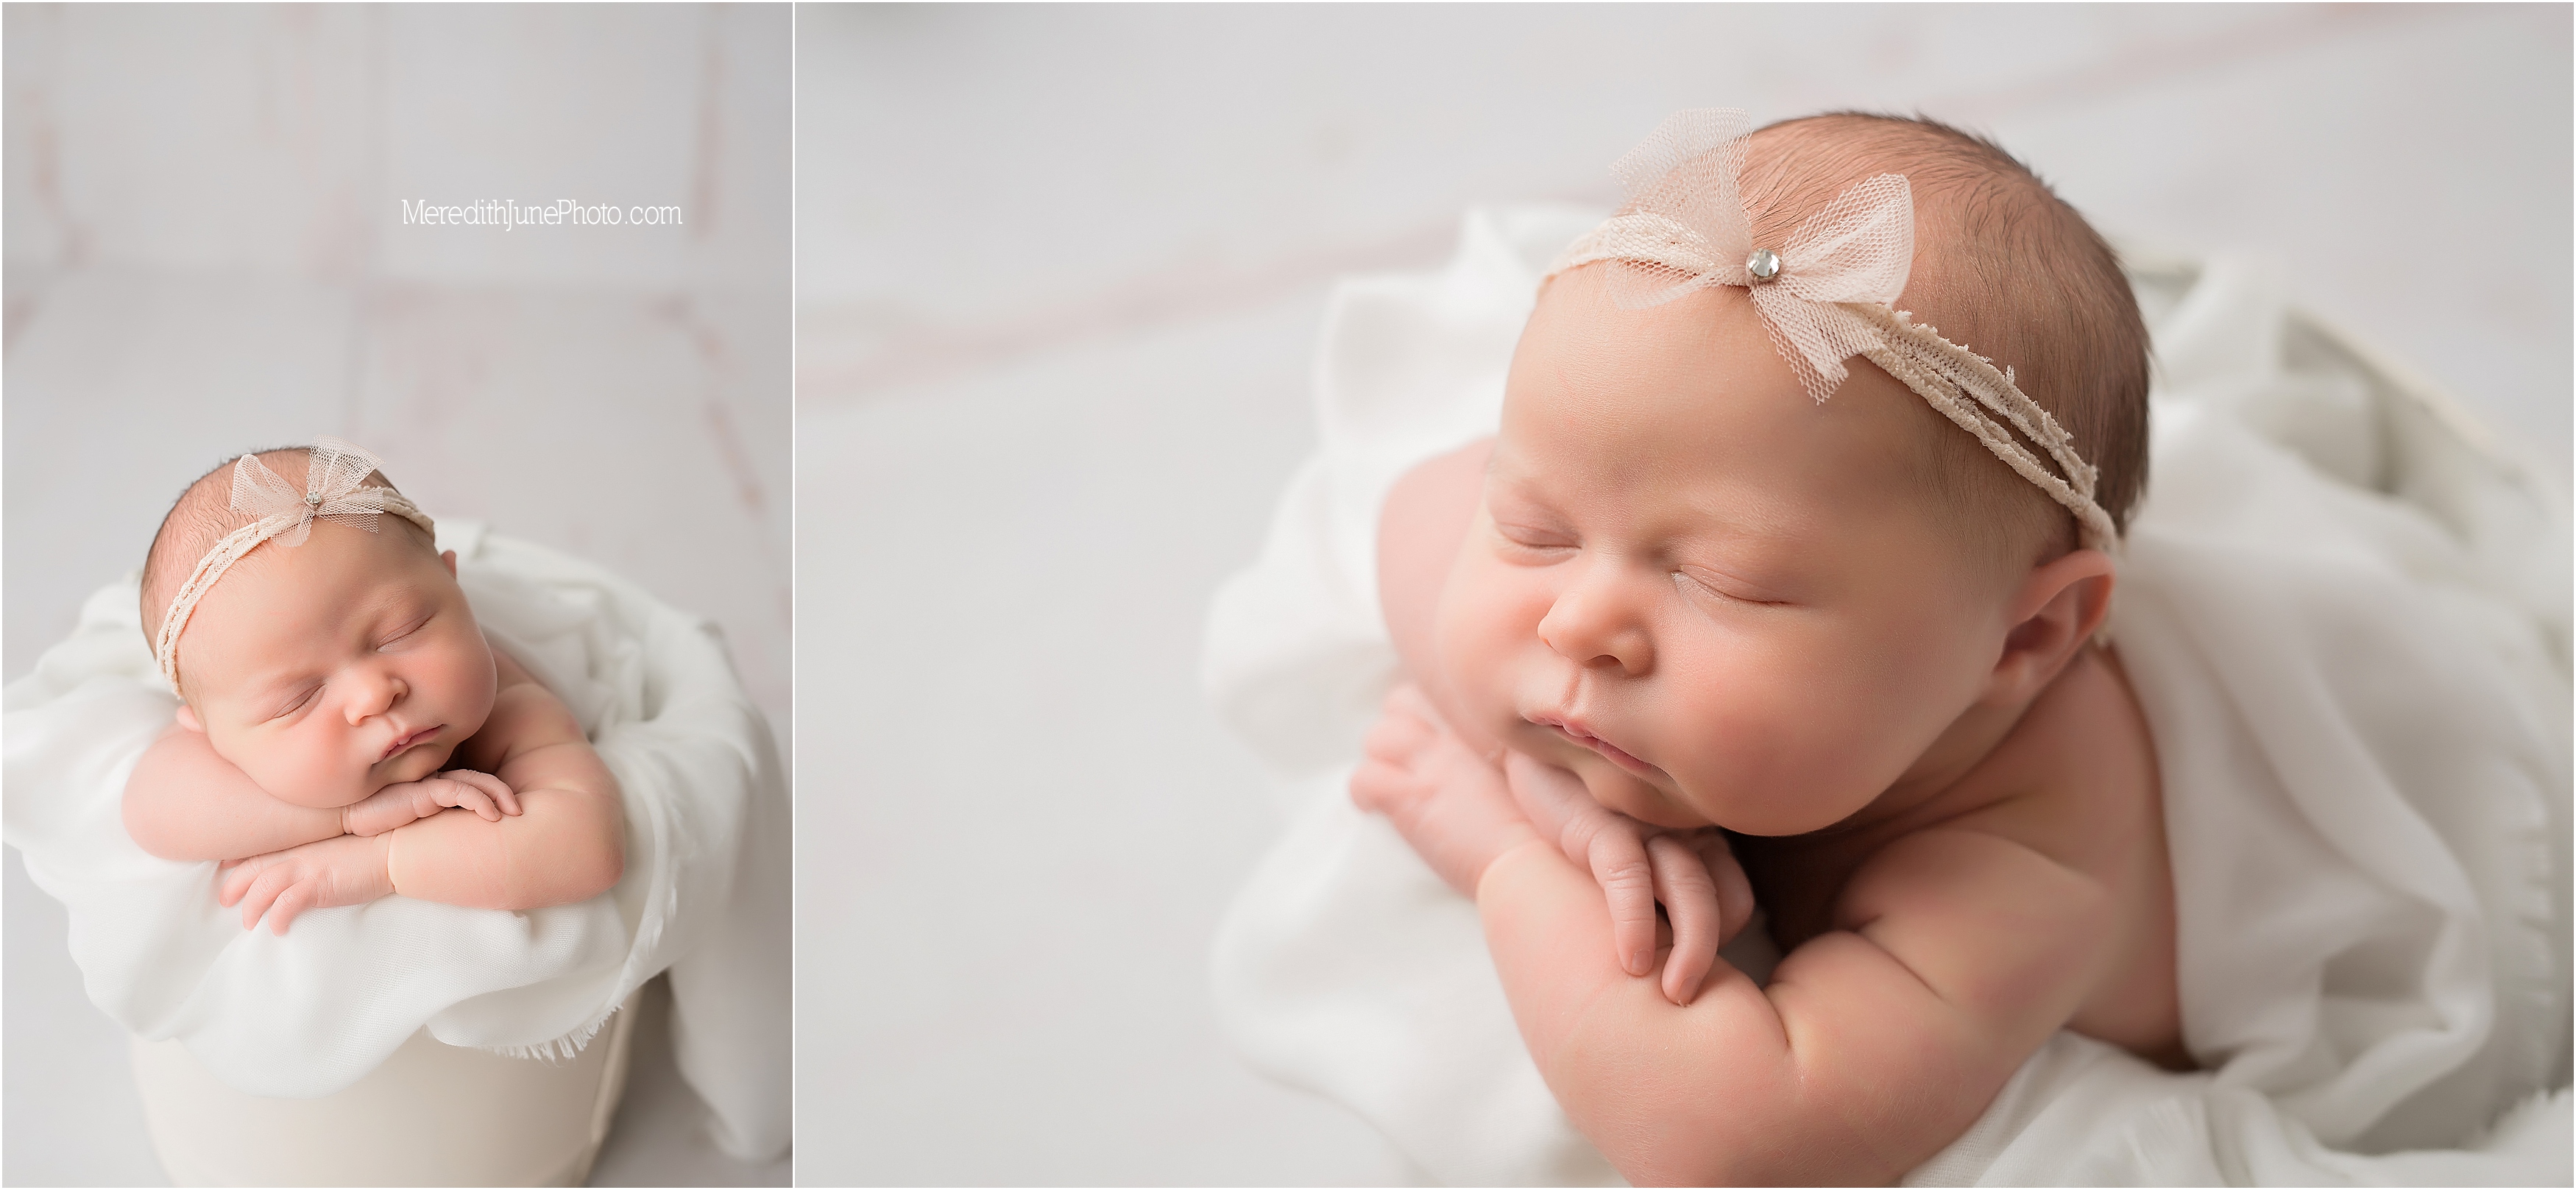 Baby girl newborn session at Meredith June Photography 